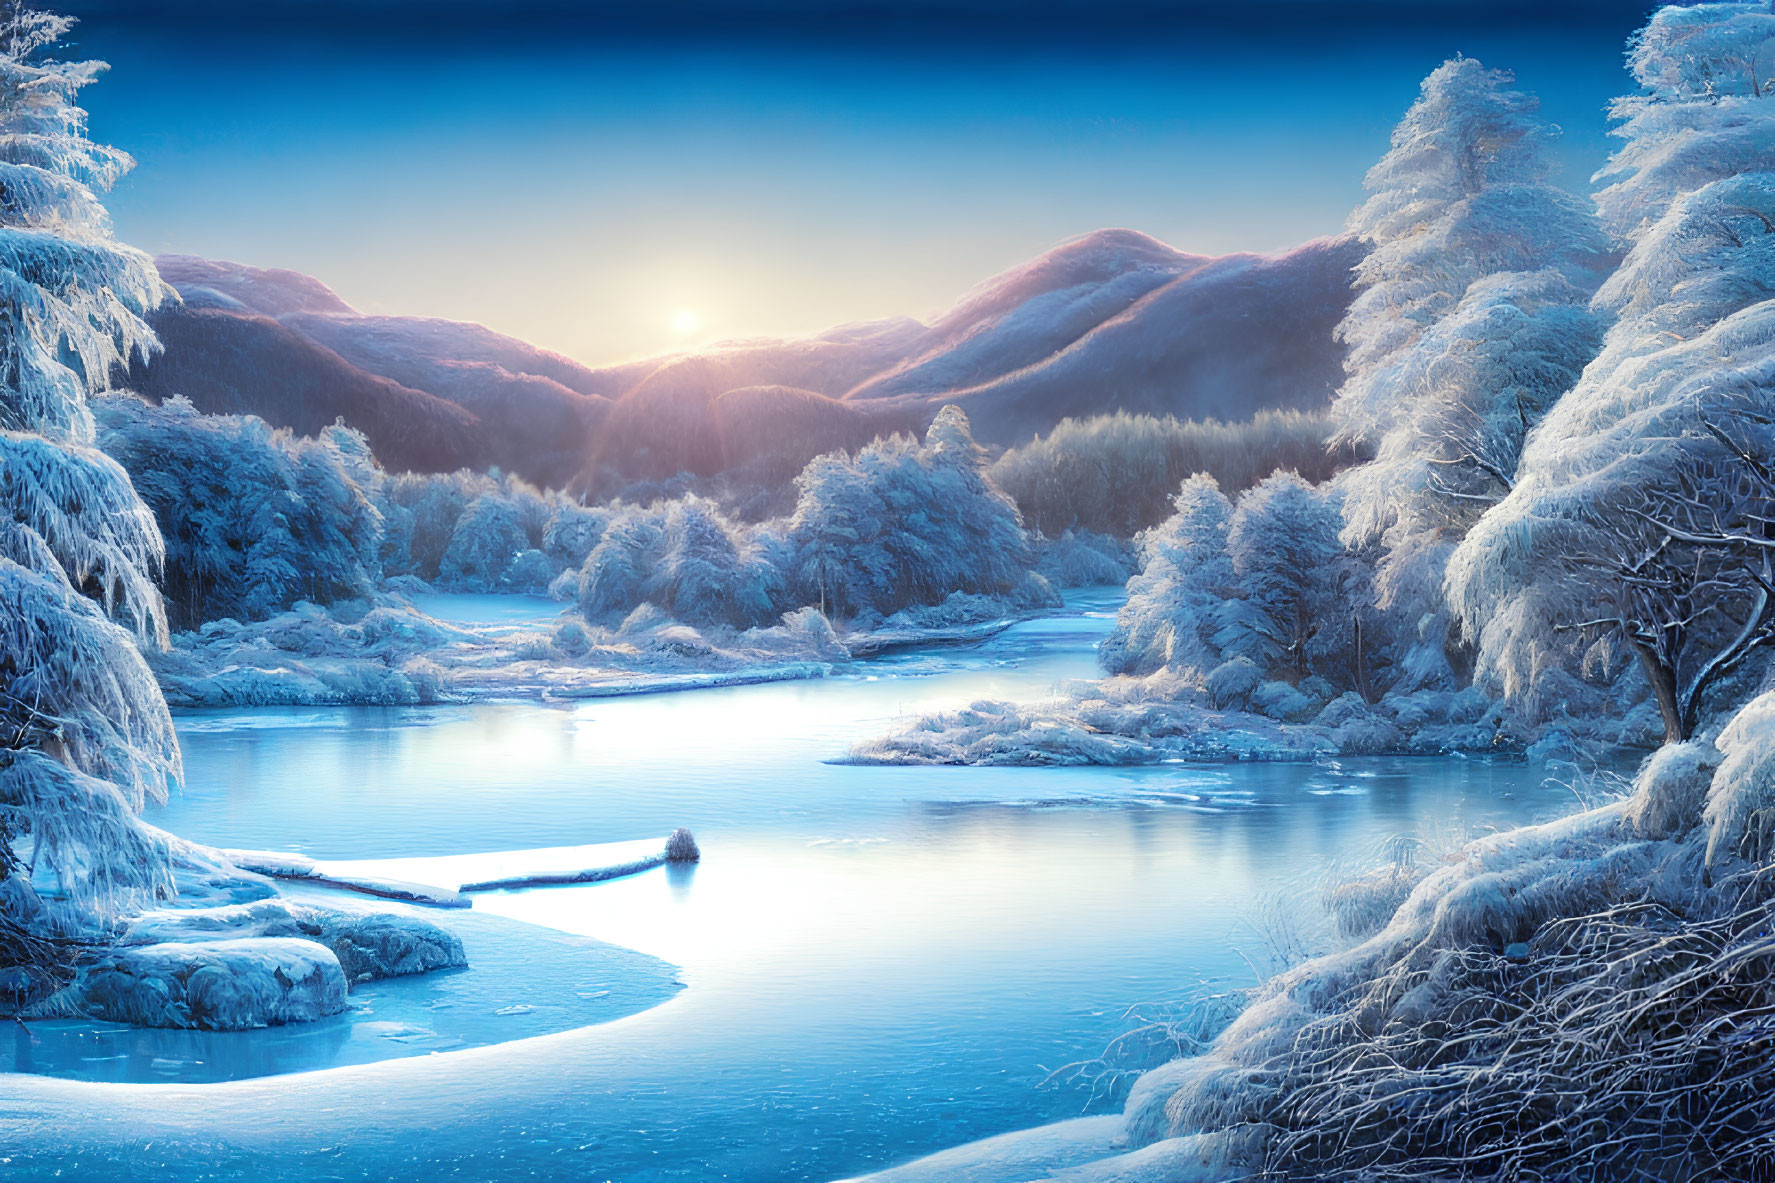 Snow-covered trees, frozen river, mountains: Serene winter landscape at sunrise